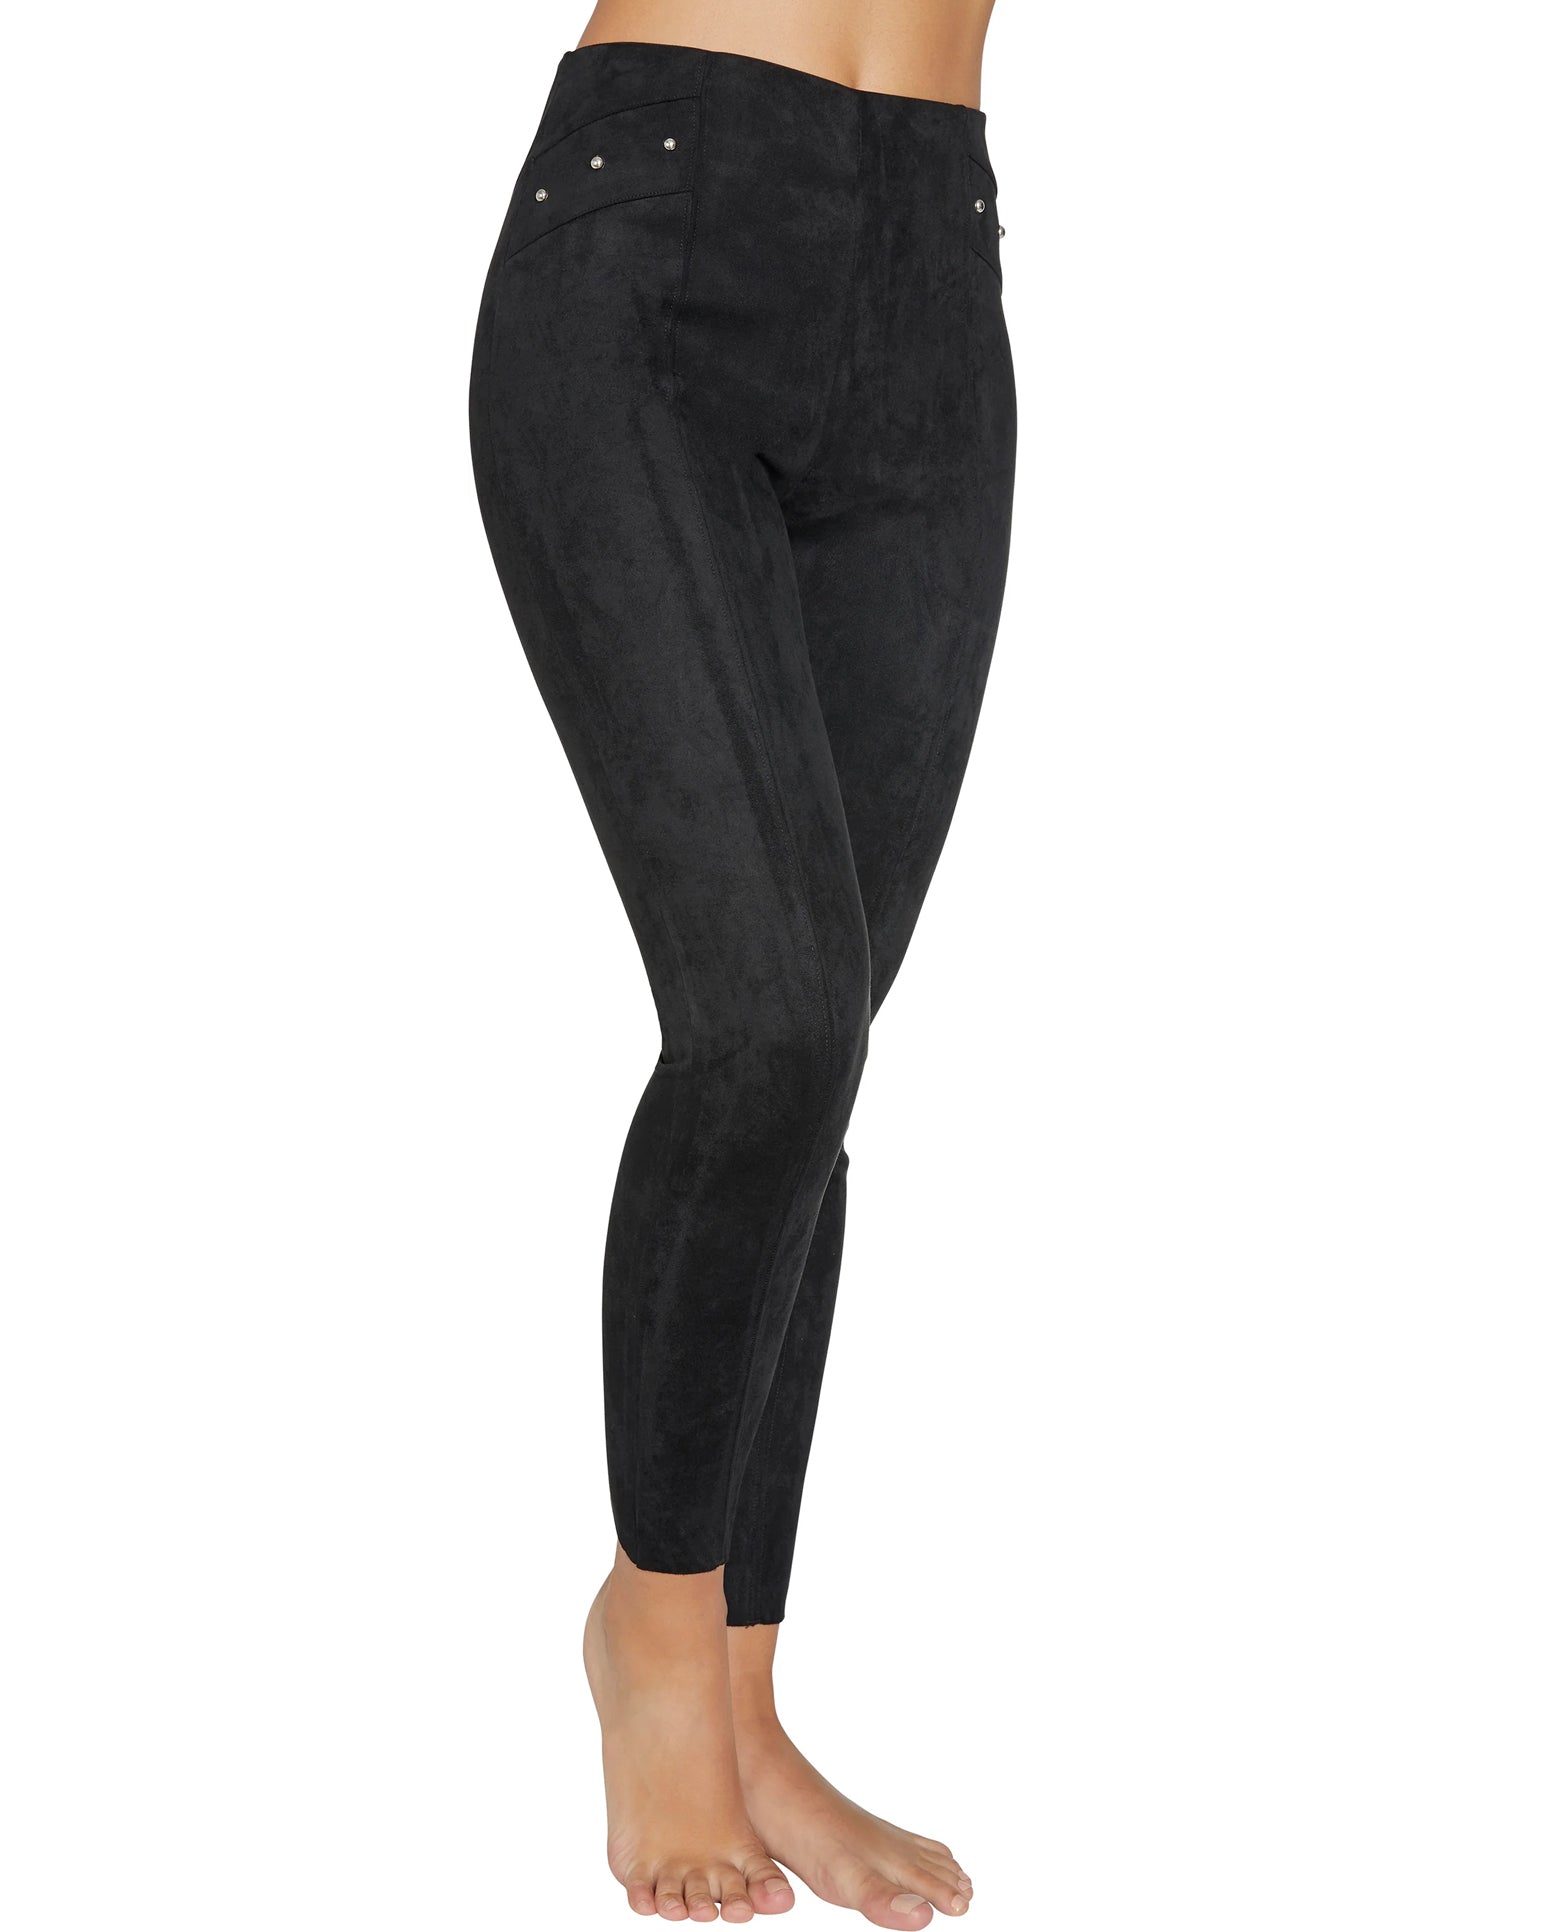 Ysabel Mora 70258 Suede Effect Treggings - black high waist trouser leggings in faux suede with silver studs